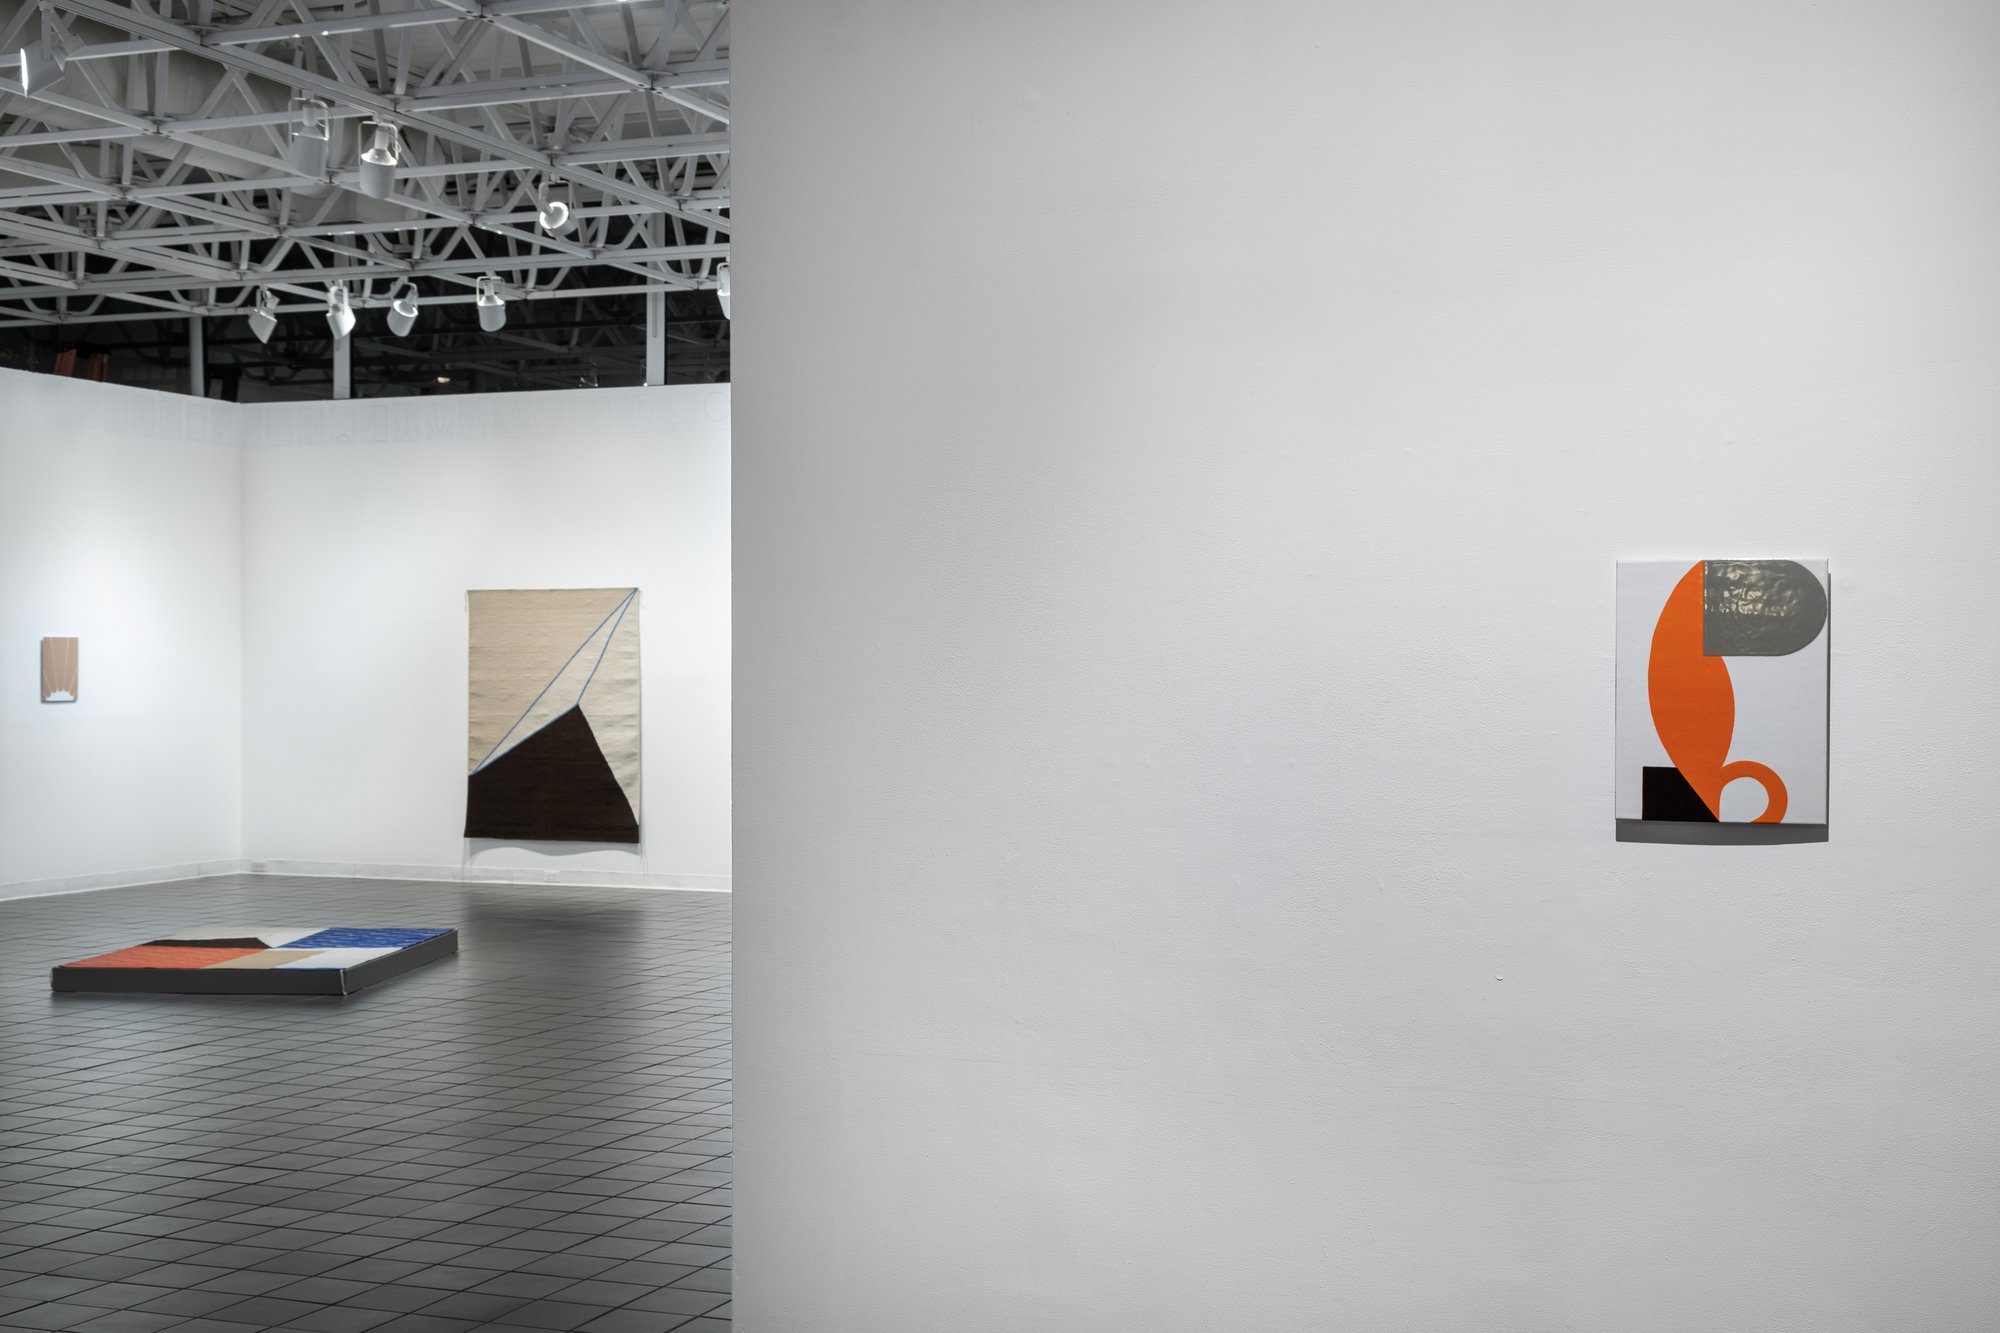 Installation view, Ulrike Müller, Or Both, The Galleries at Moore, Philadelphia, 2019